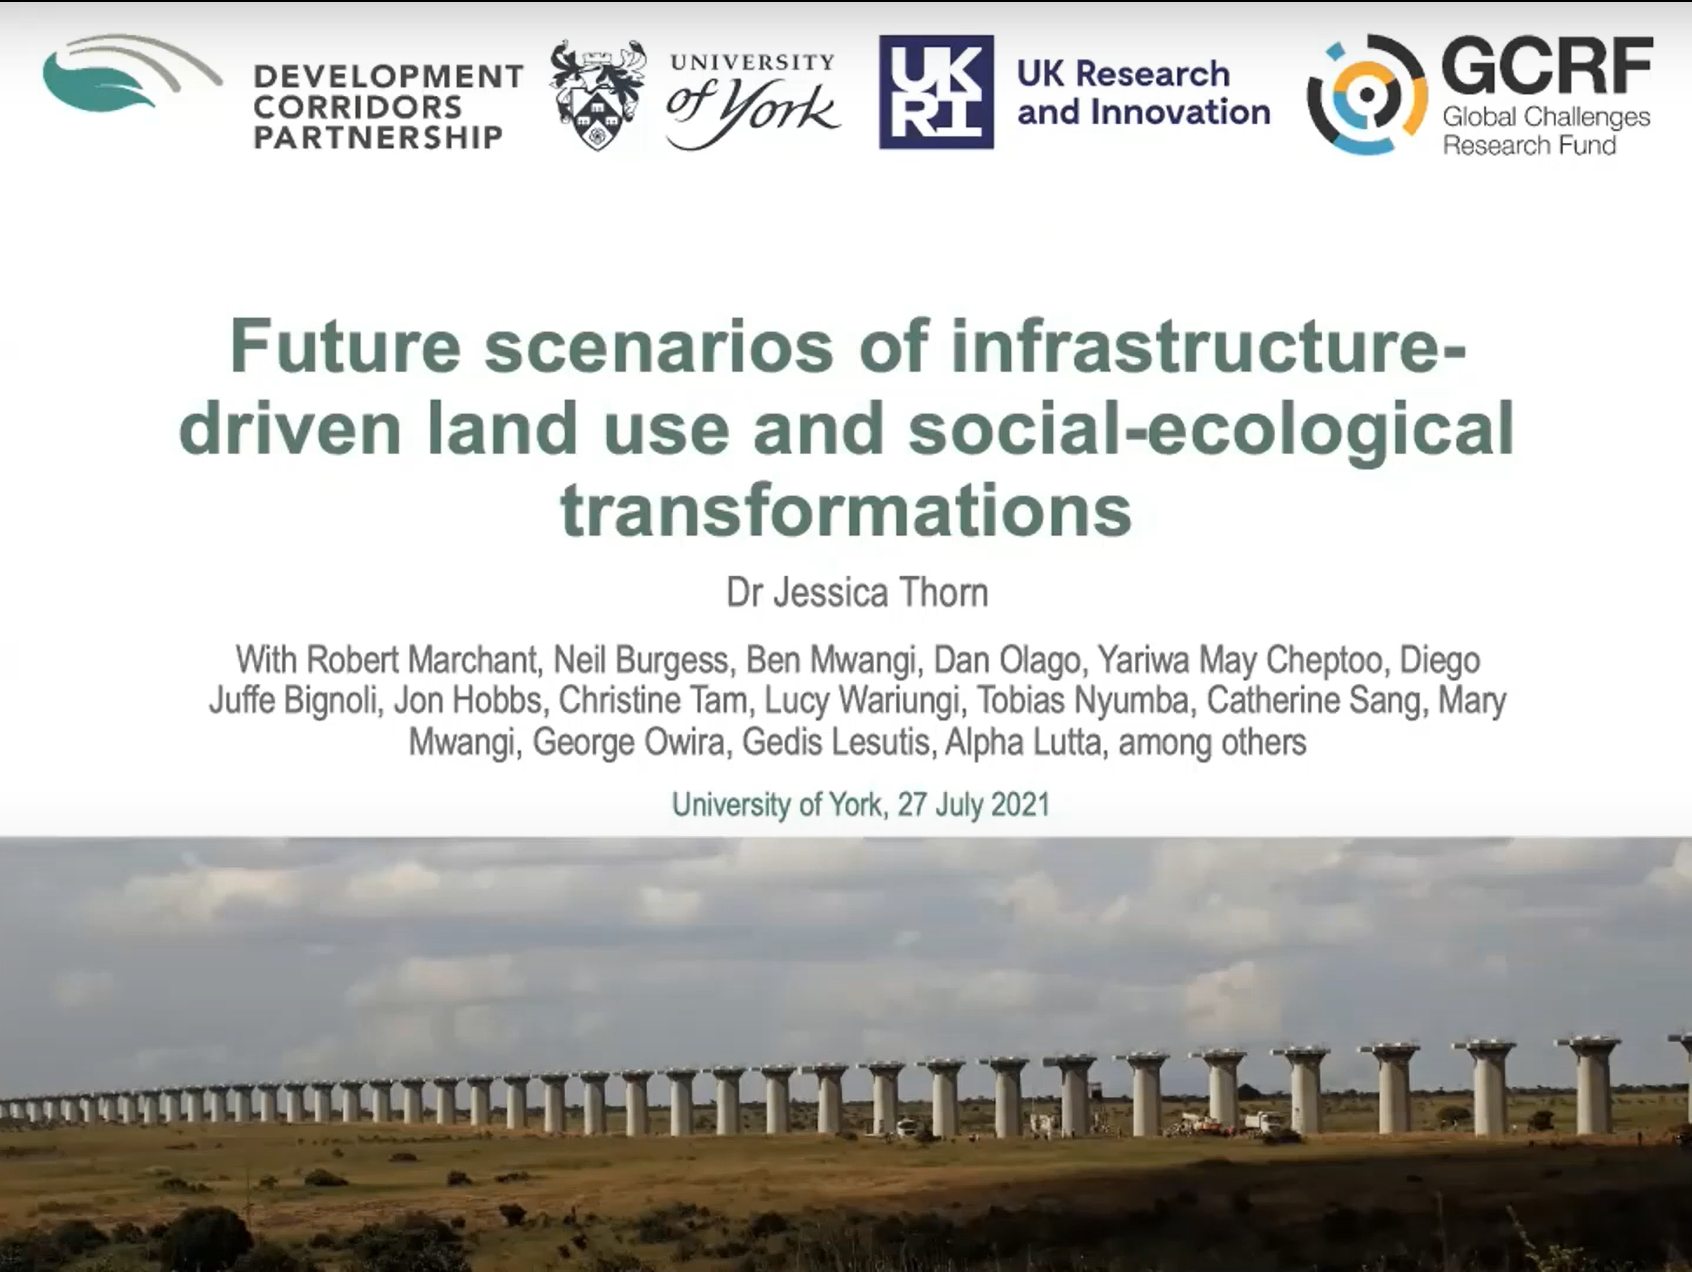 Future scenarios of infrastructure-driven land use and social-ecological transformations